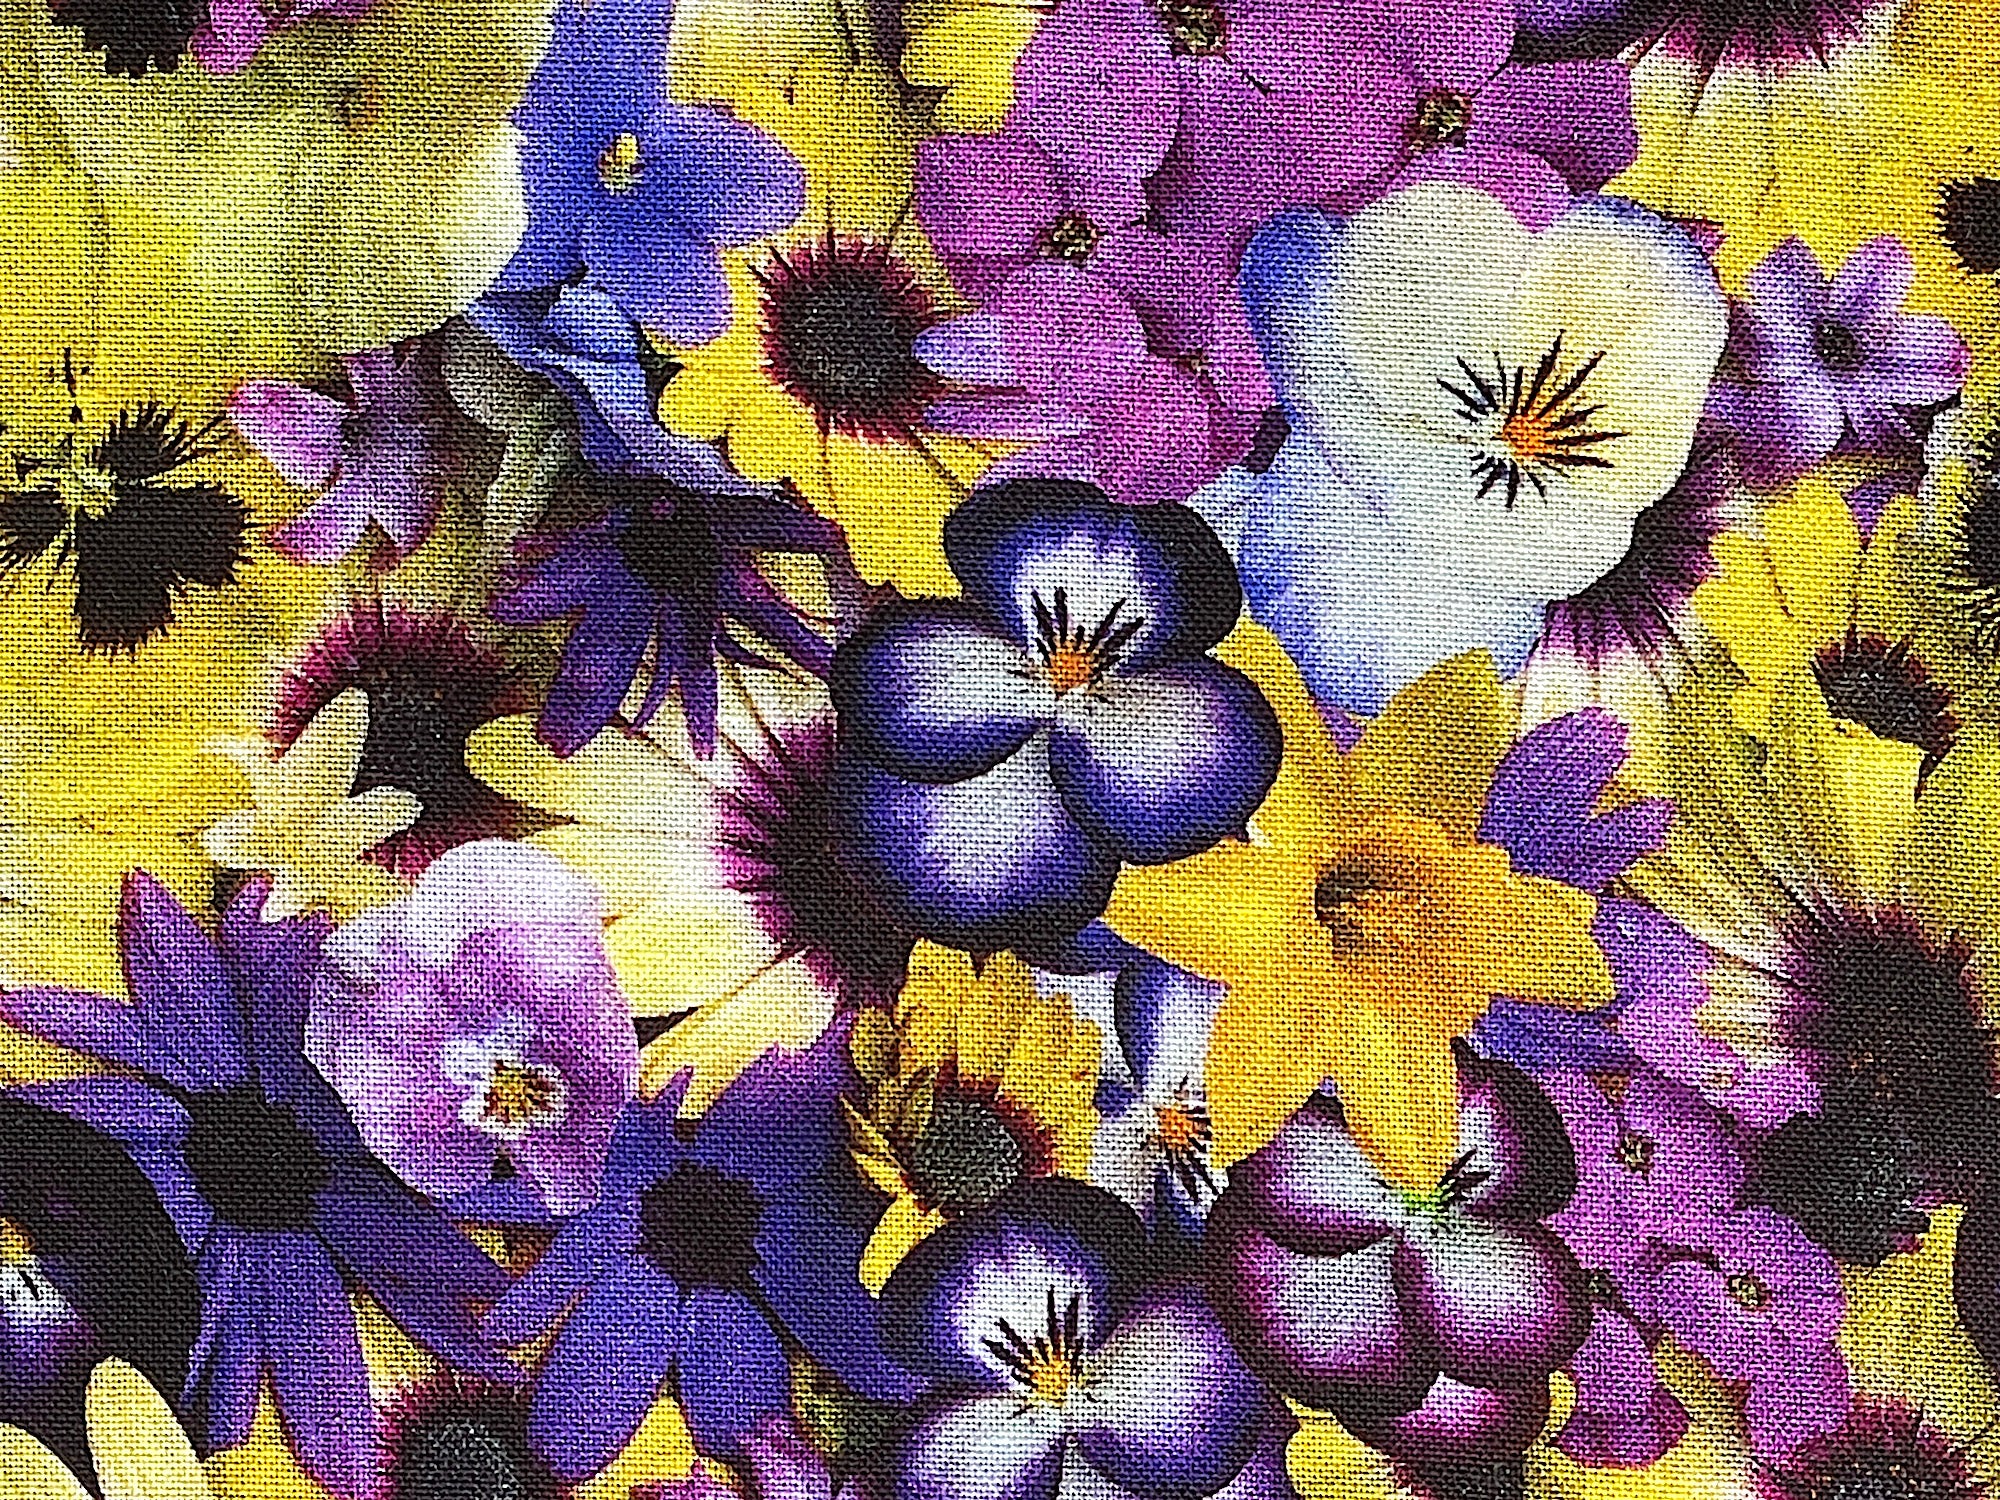 Close up of pansies, daffodils and daisies.